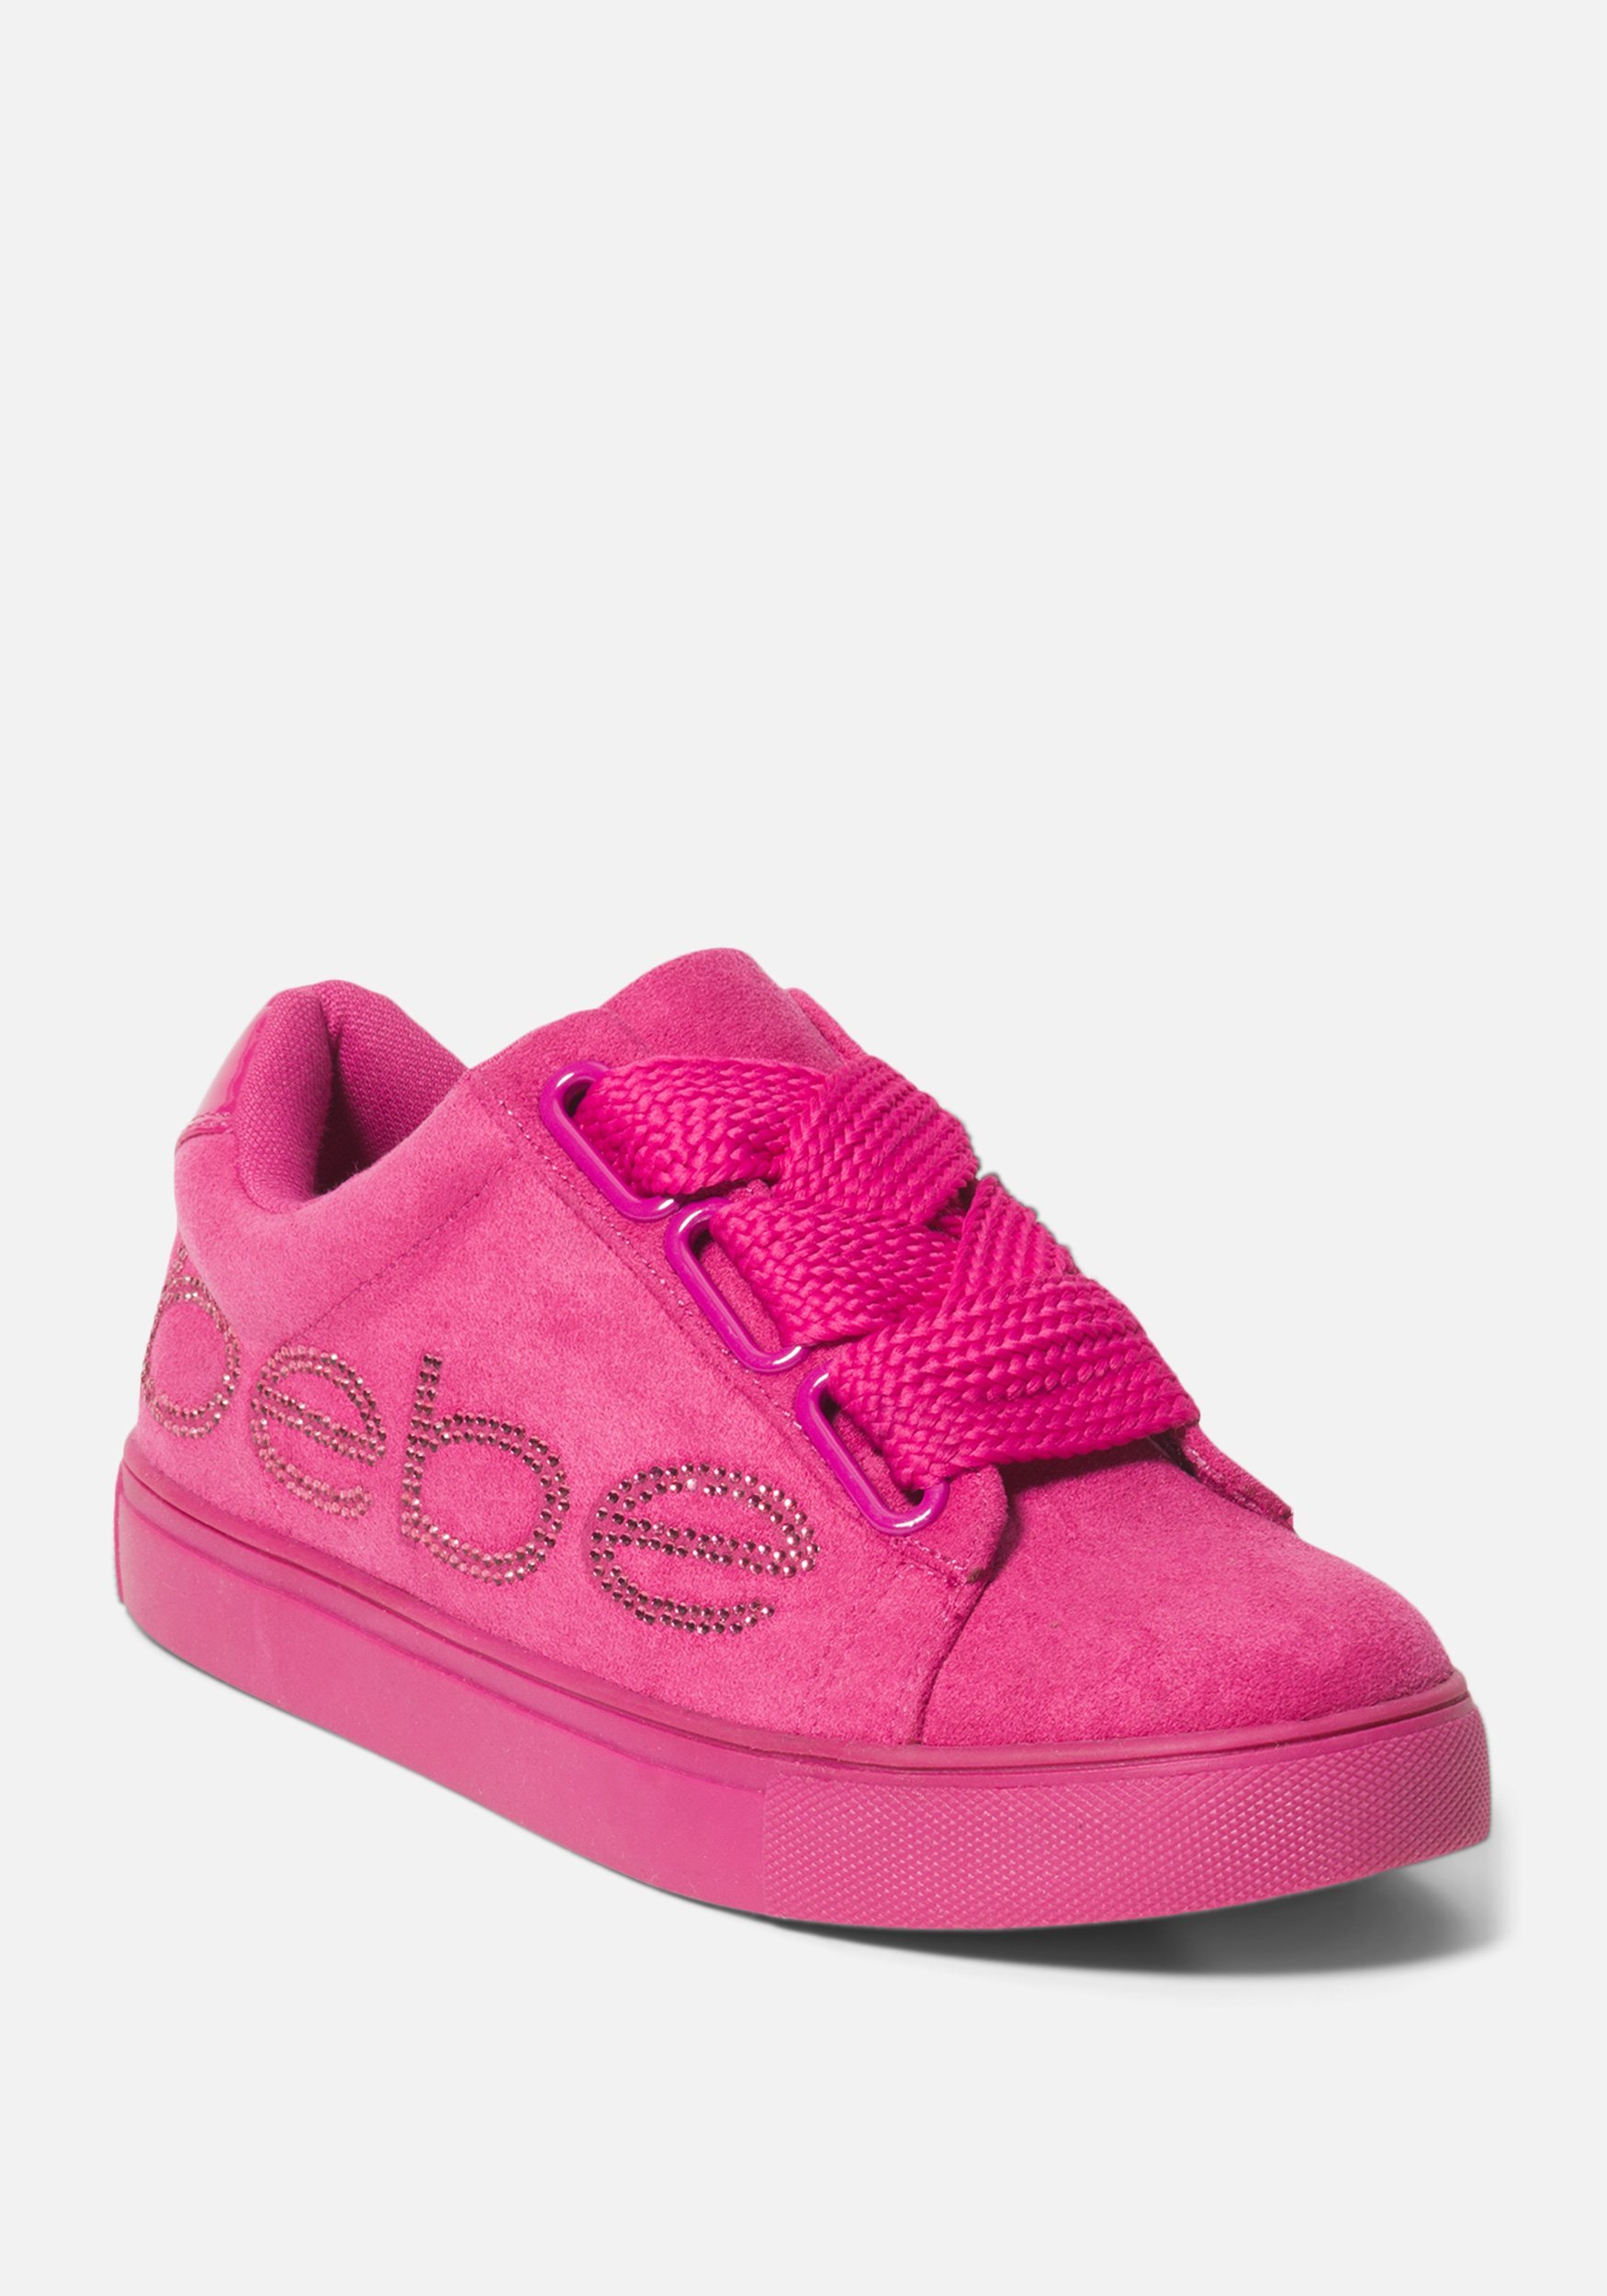 Women's Cabree Bebe Logo Sneakers, Size 7 in Hot Pink Synthetic